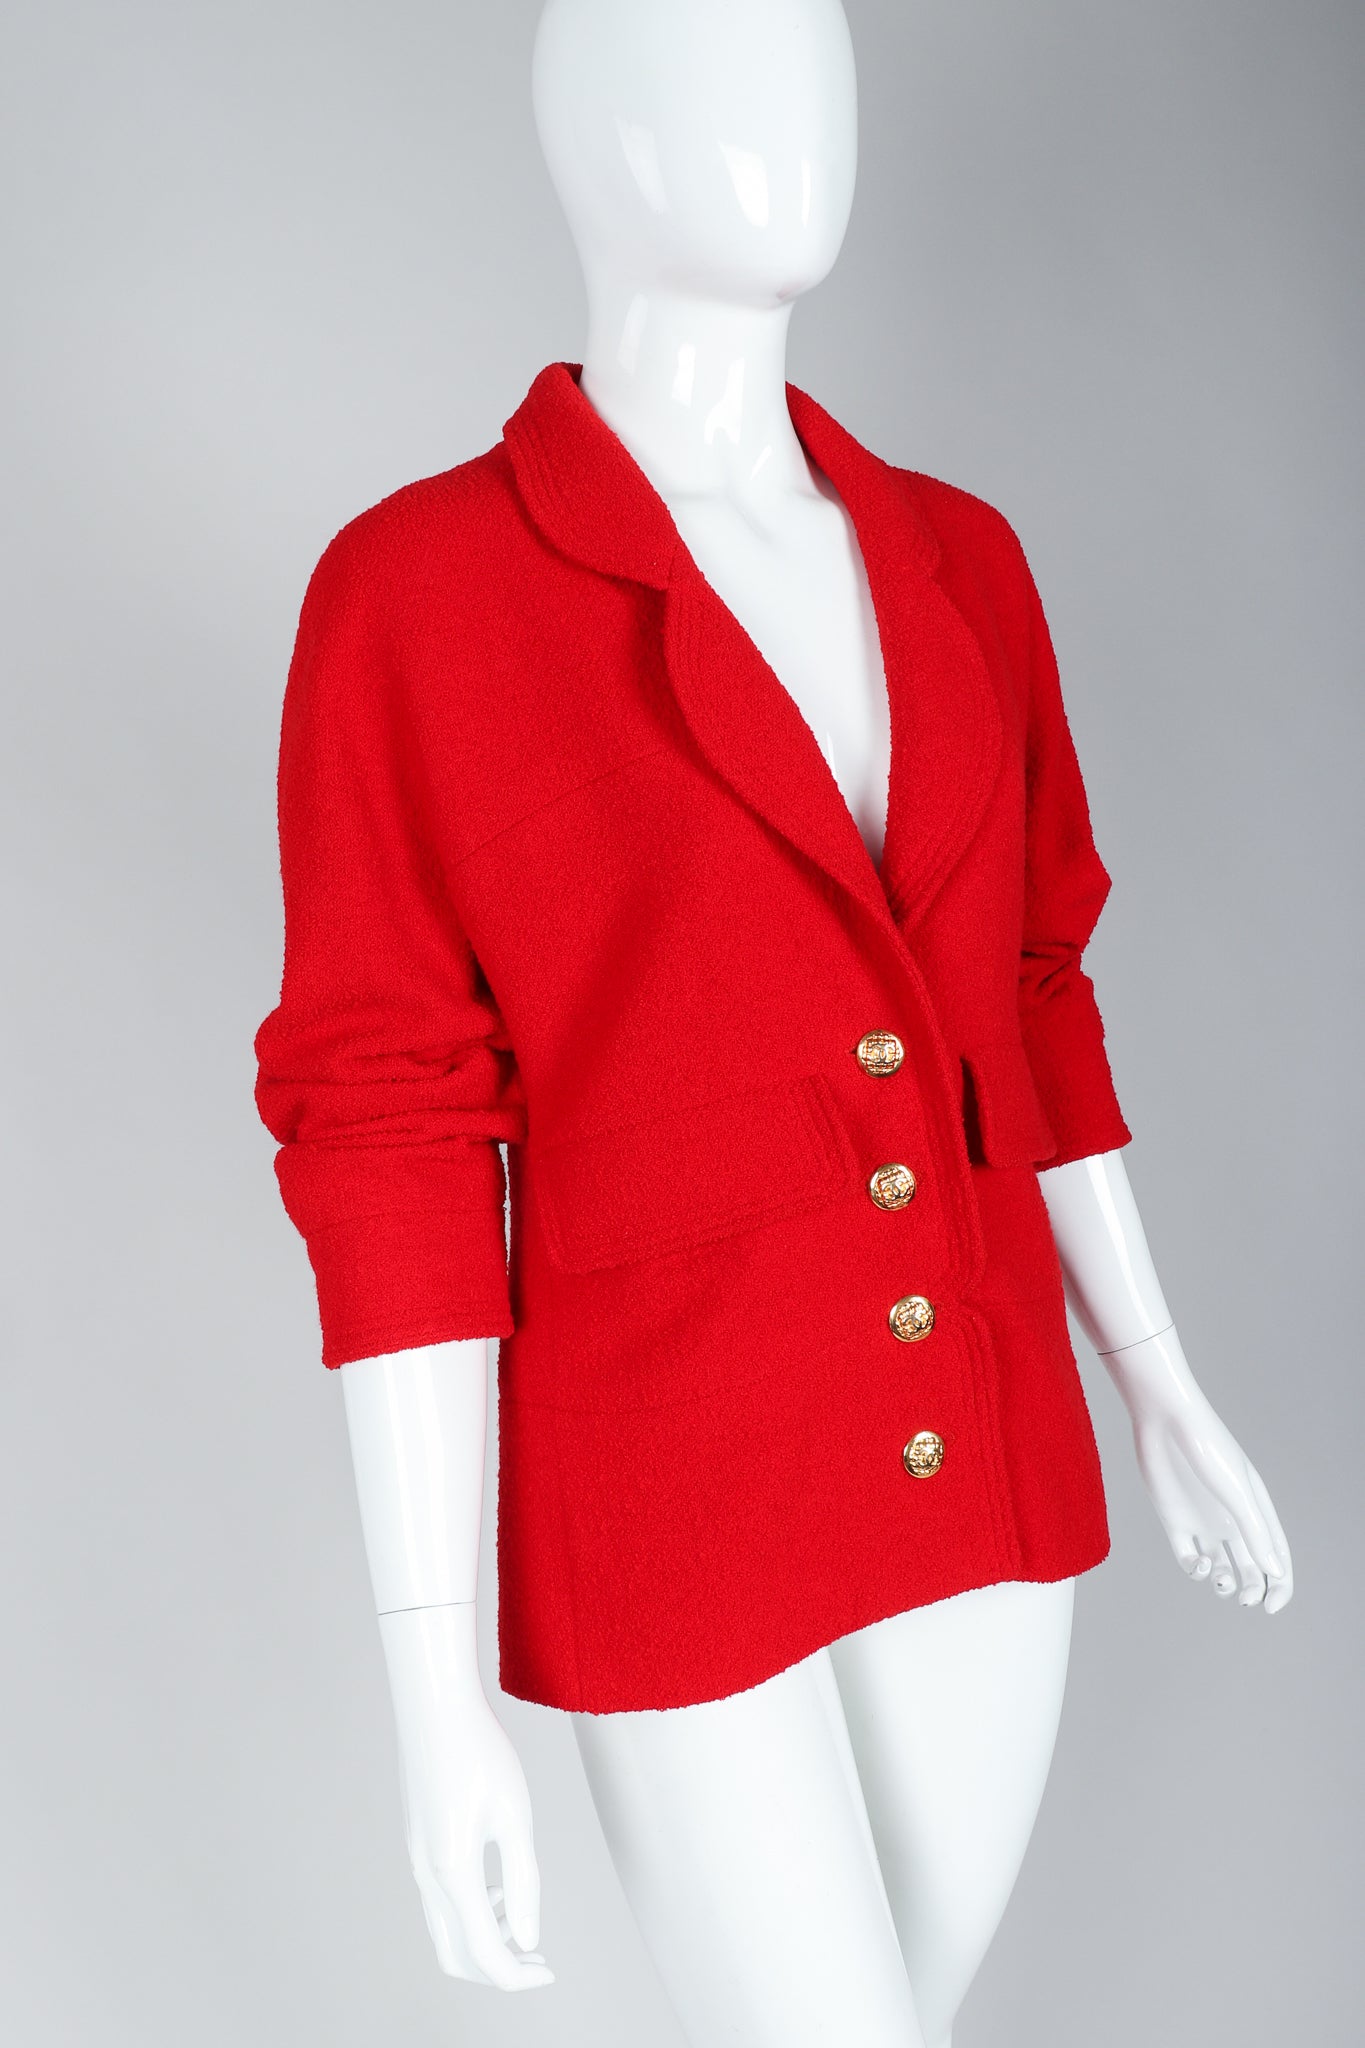 Recess Vintage Chanel Red Curved Lapel Bouclé Jacket on Mannequin, Sleeves Pushed Up